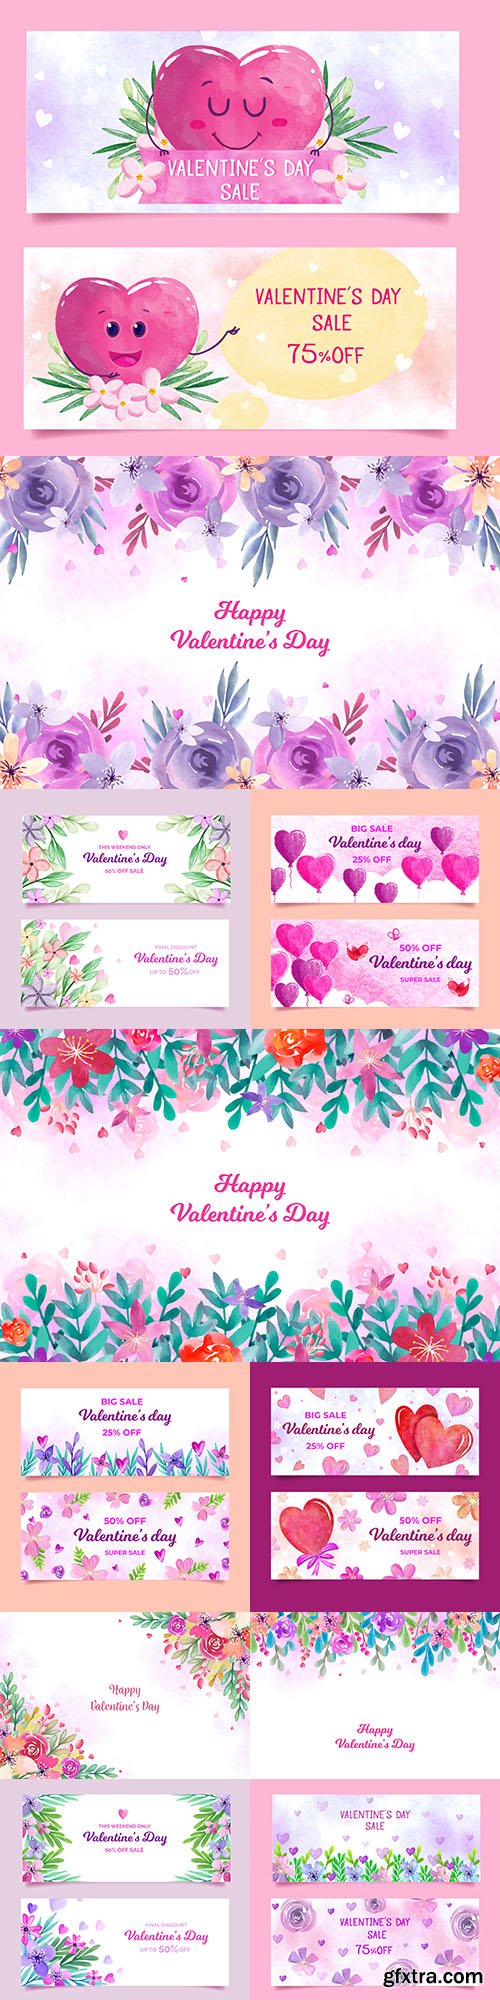 Valentine\'s Day background and banner watercolor design